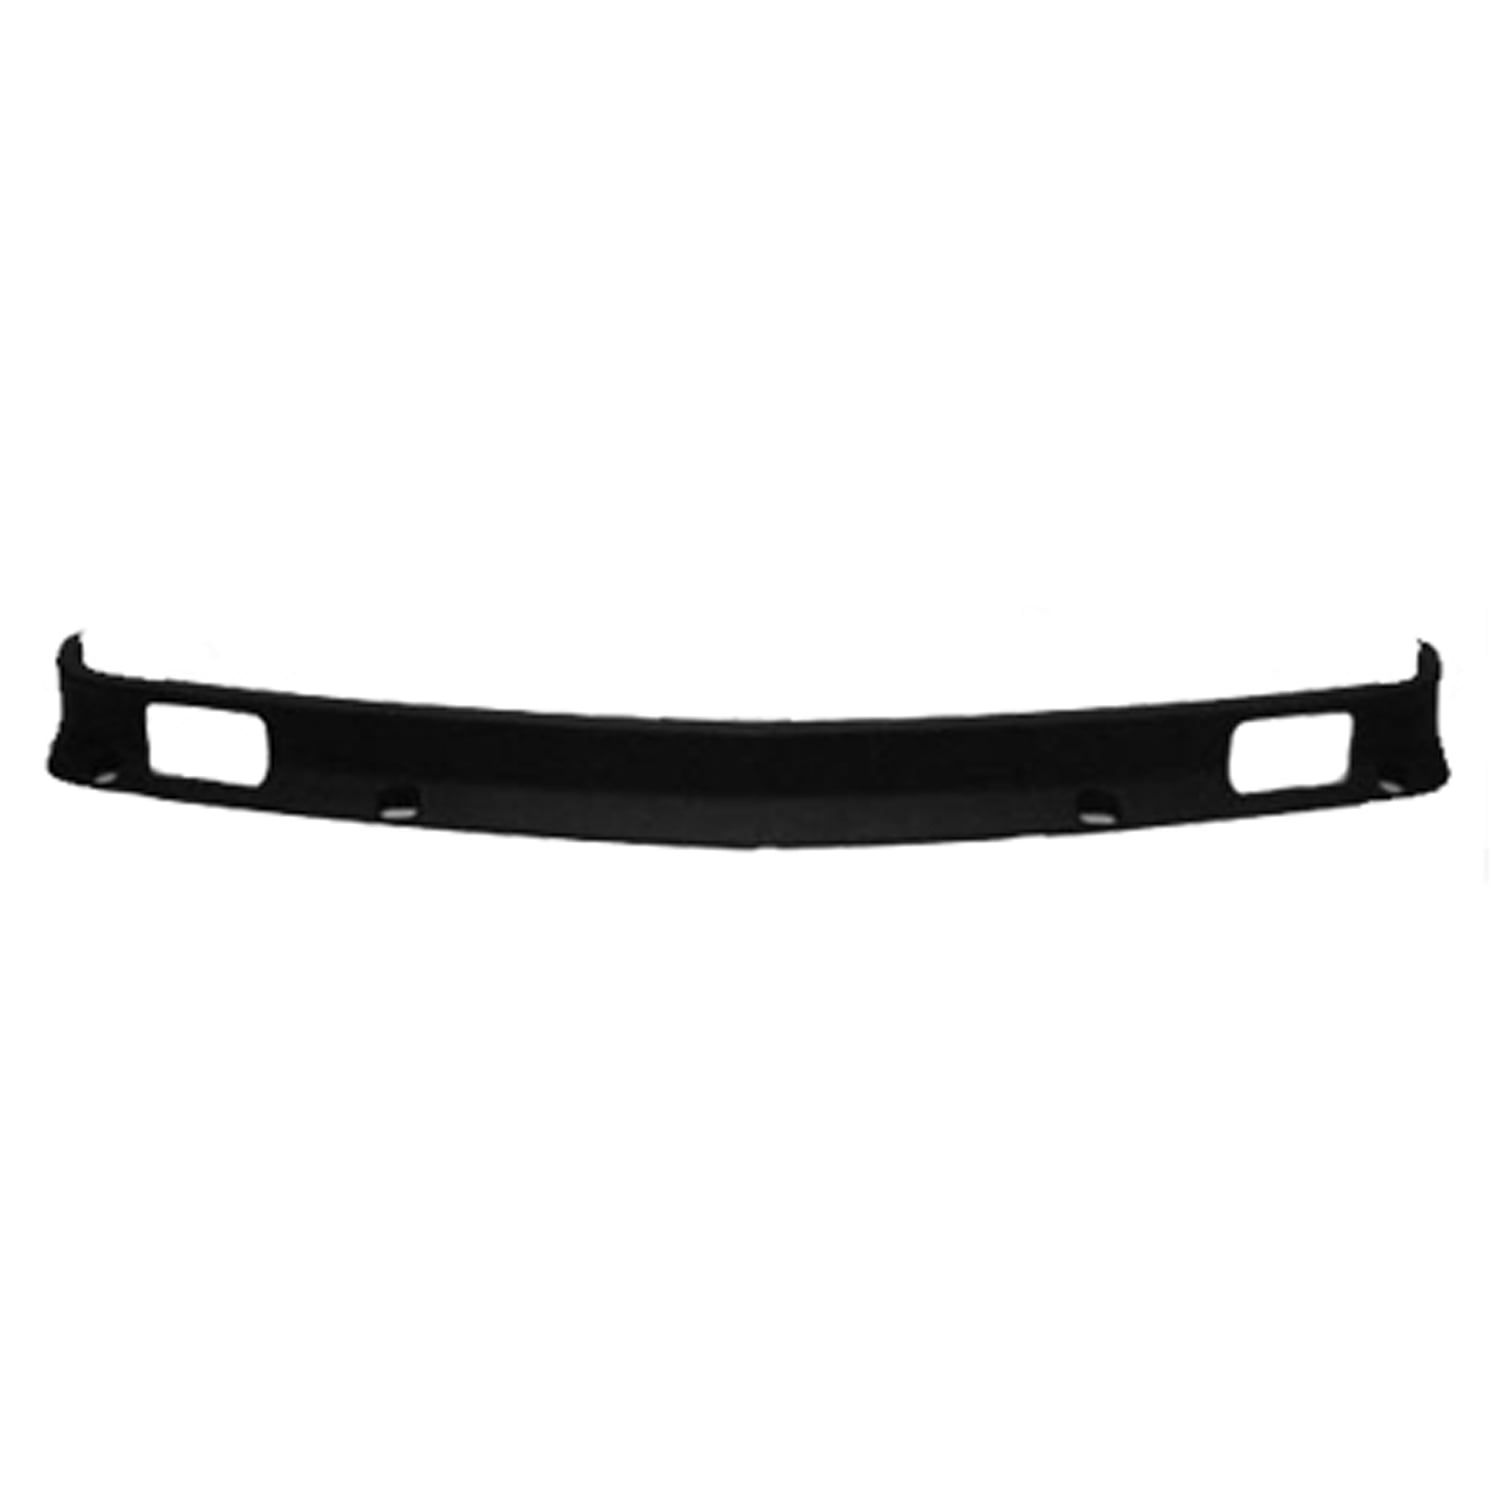 KAI New Economy Replacement Front Lower Bumper Deflector, Fits